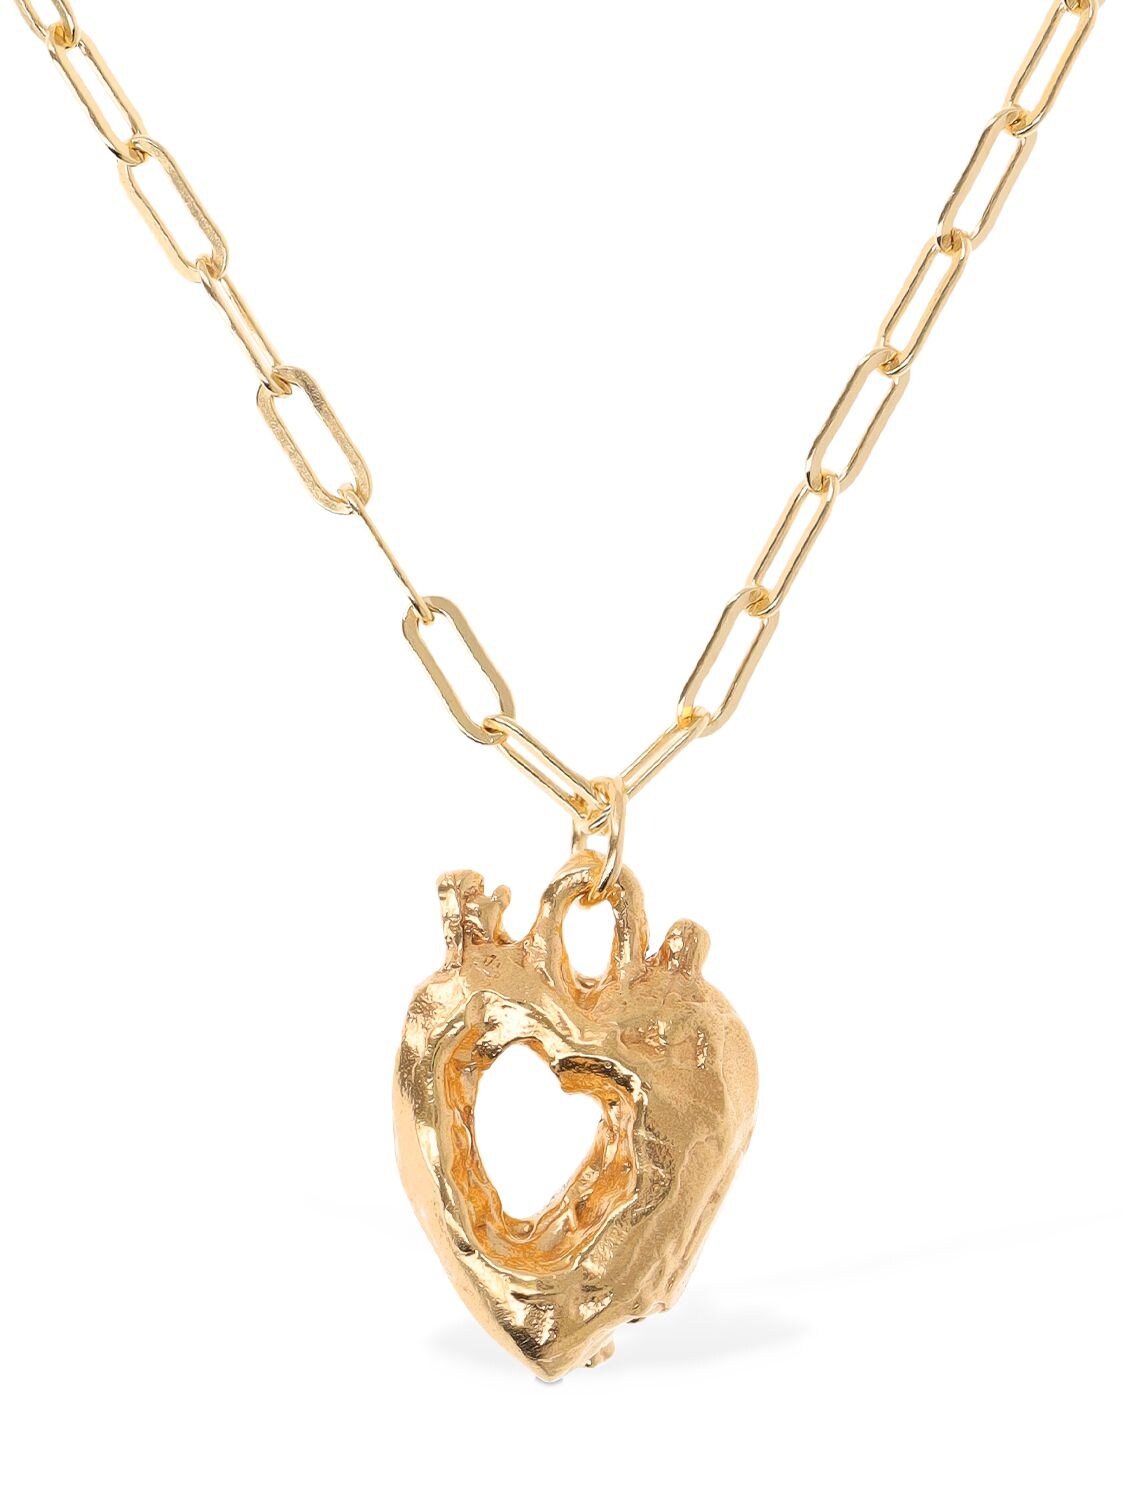 ALIGHIERI THE LOVER'S PACT NECKLACE